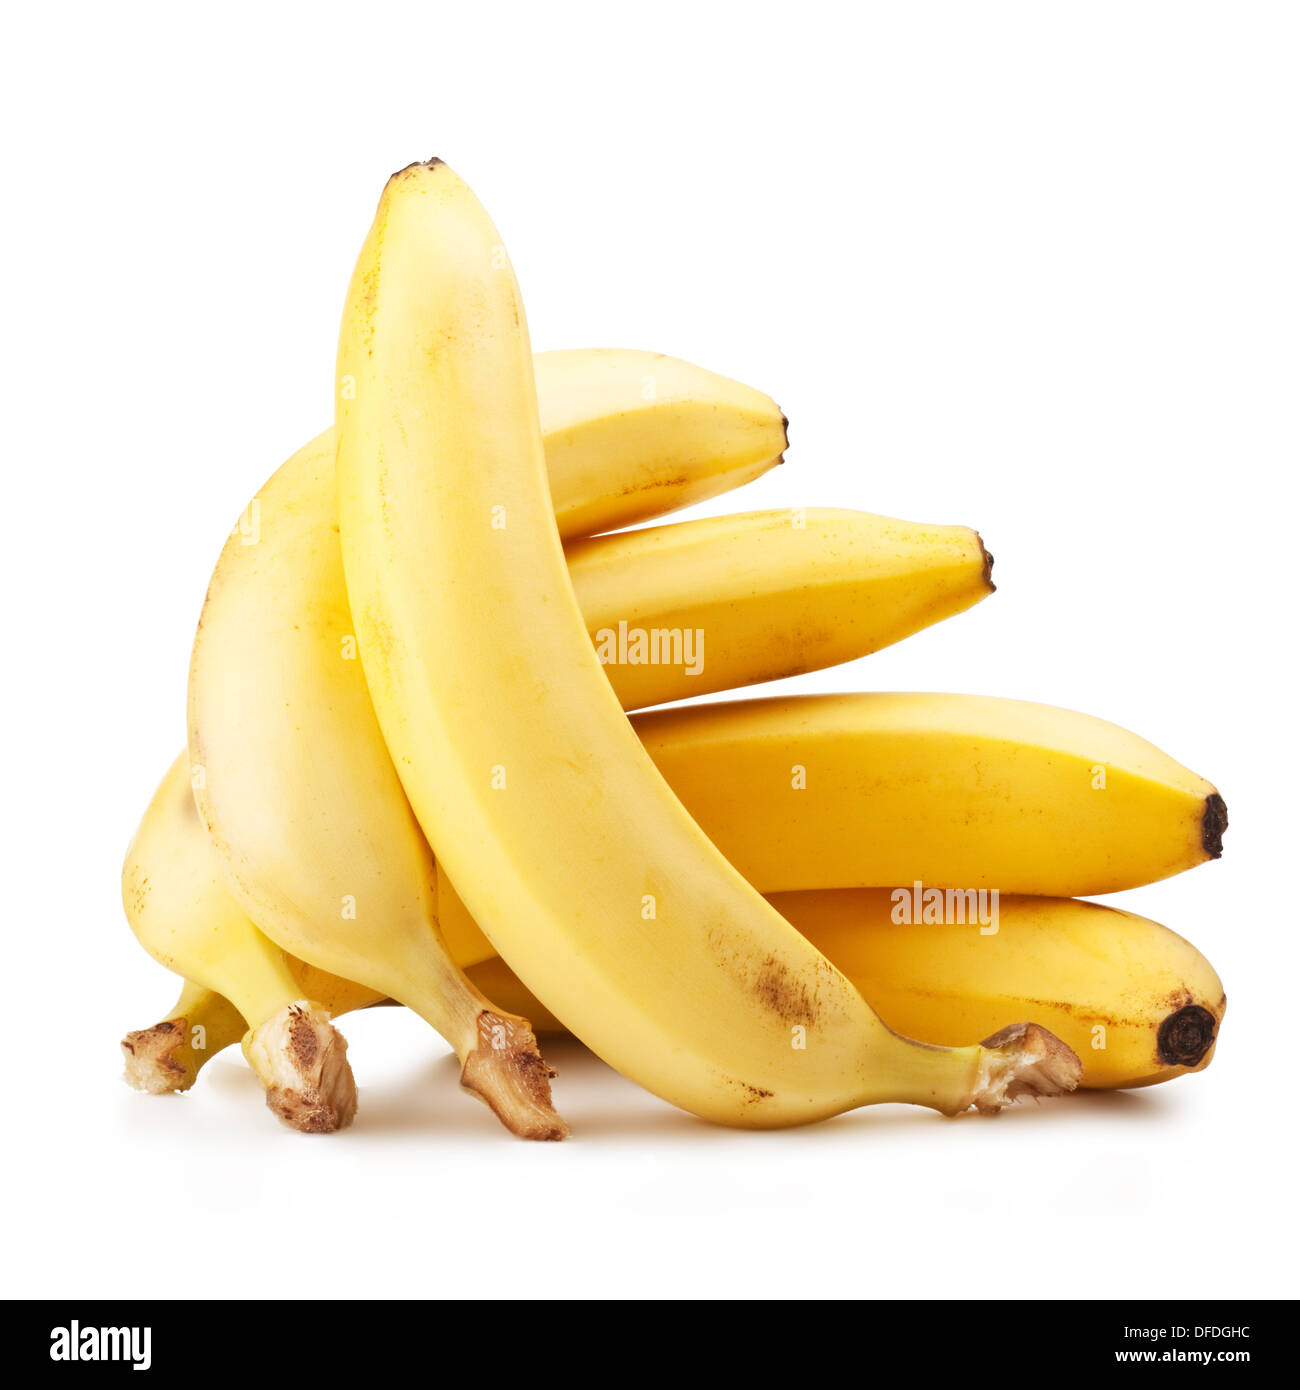 https://c8.alamy.com/comp/DFDGHC/bunch-of-bananas-isolated-on-white-background-DFDGHC.jpg